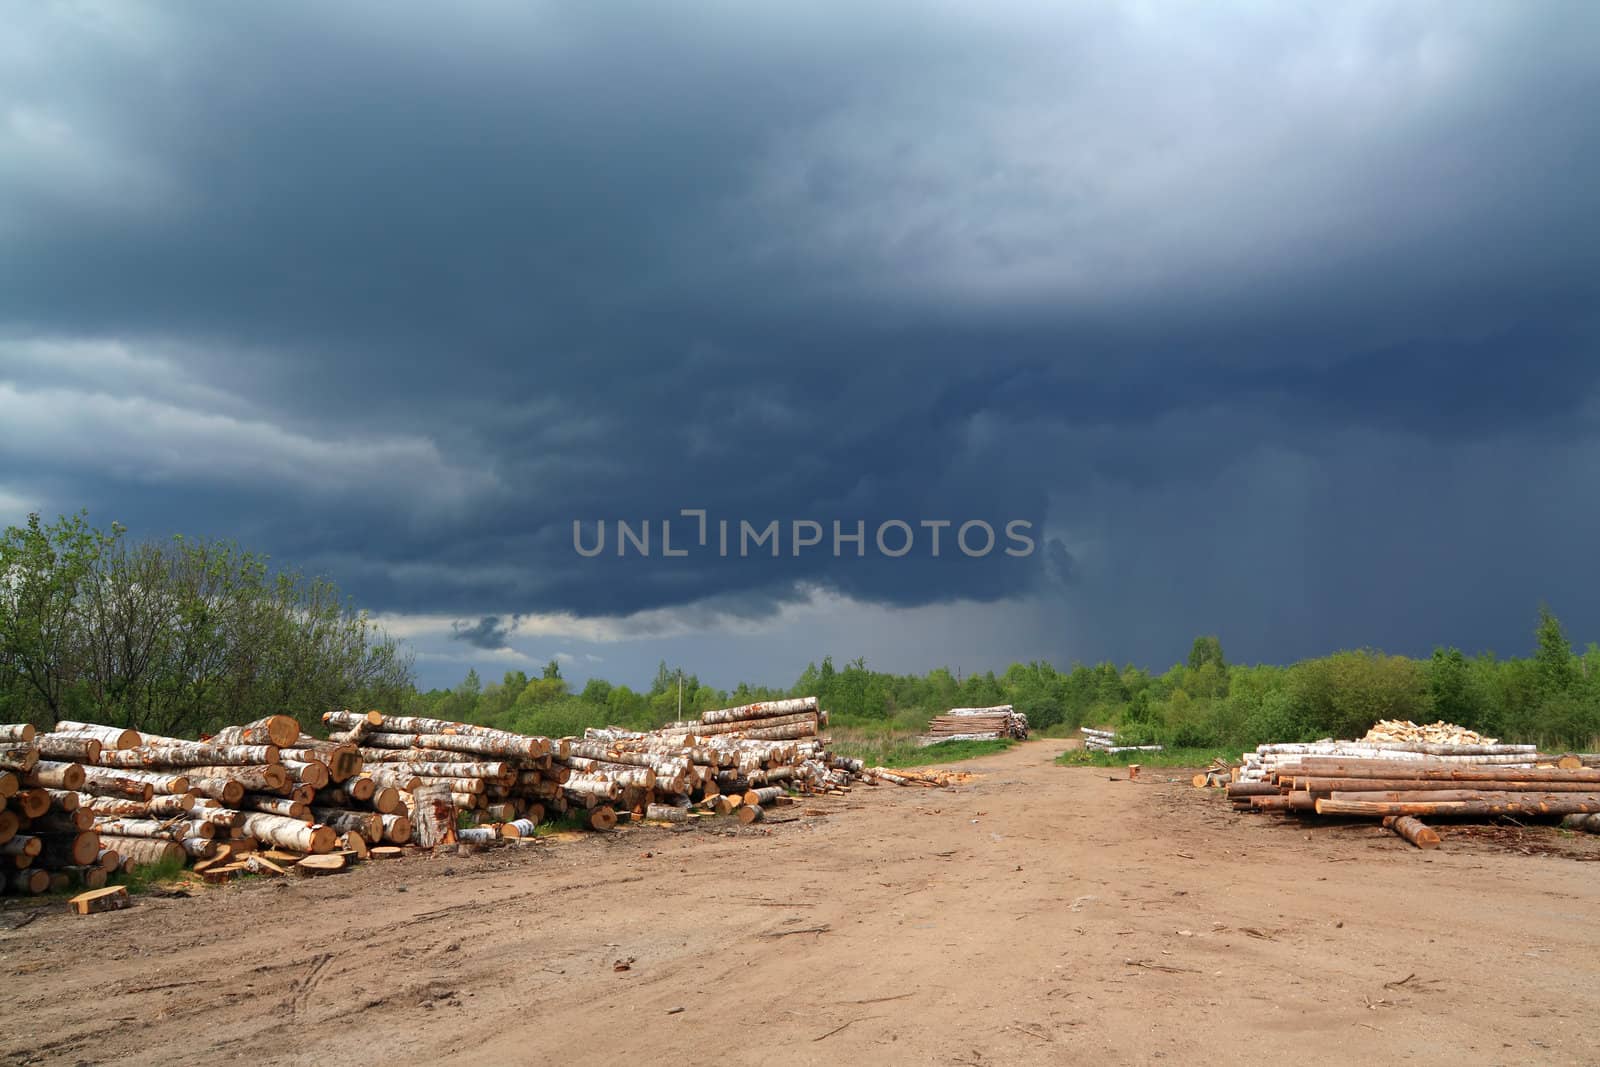 birch log on rural road under cloudy sky by basel101658